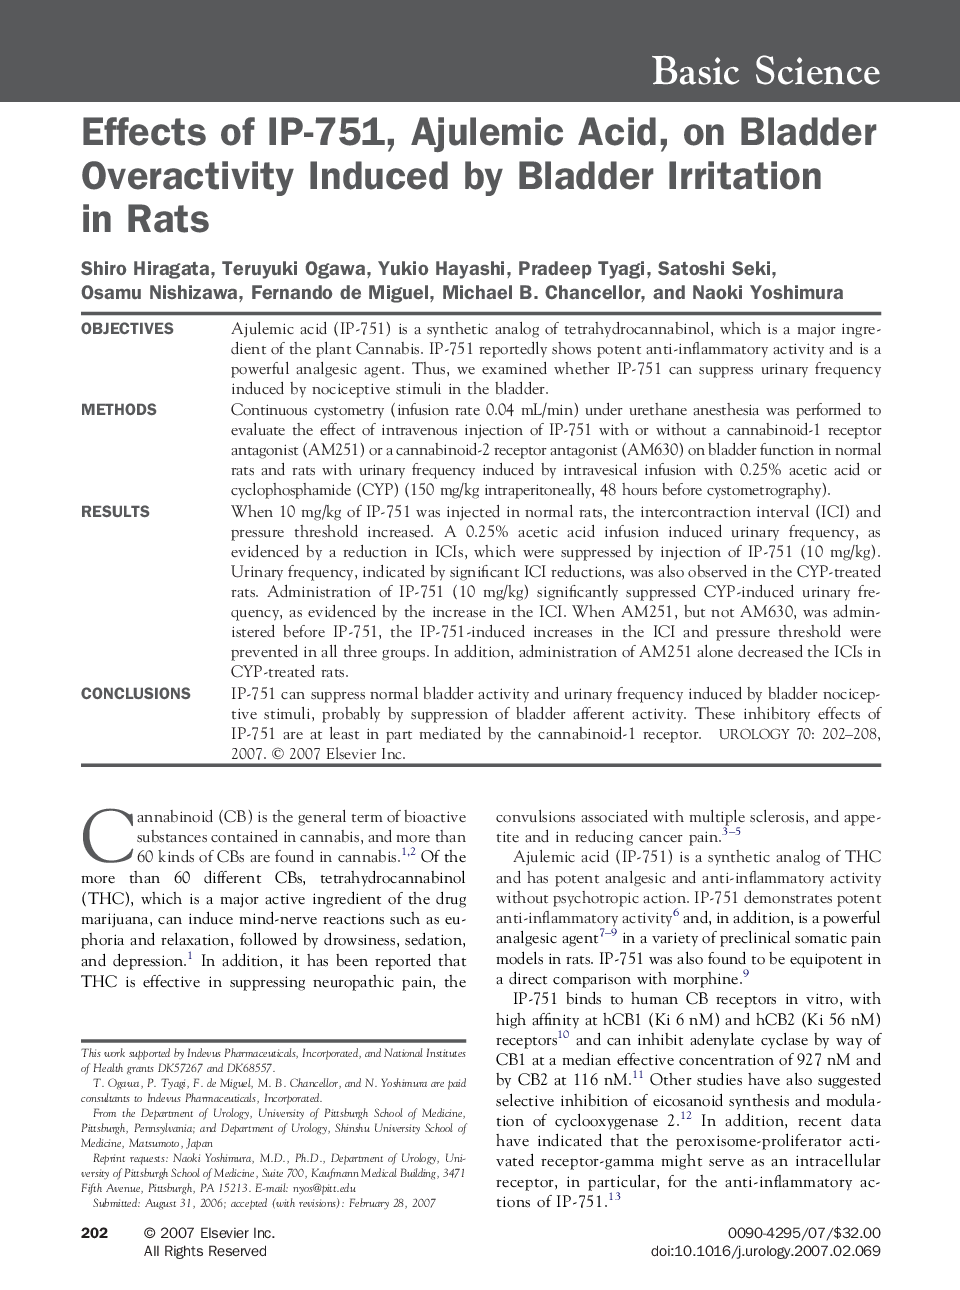 Effects of IP-751, Ajulemic Acid, on Bladder Overactivity Induced by Bladder Irritation in Rats 